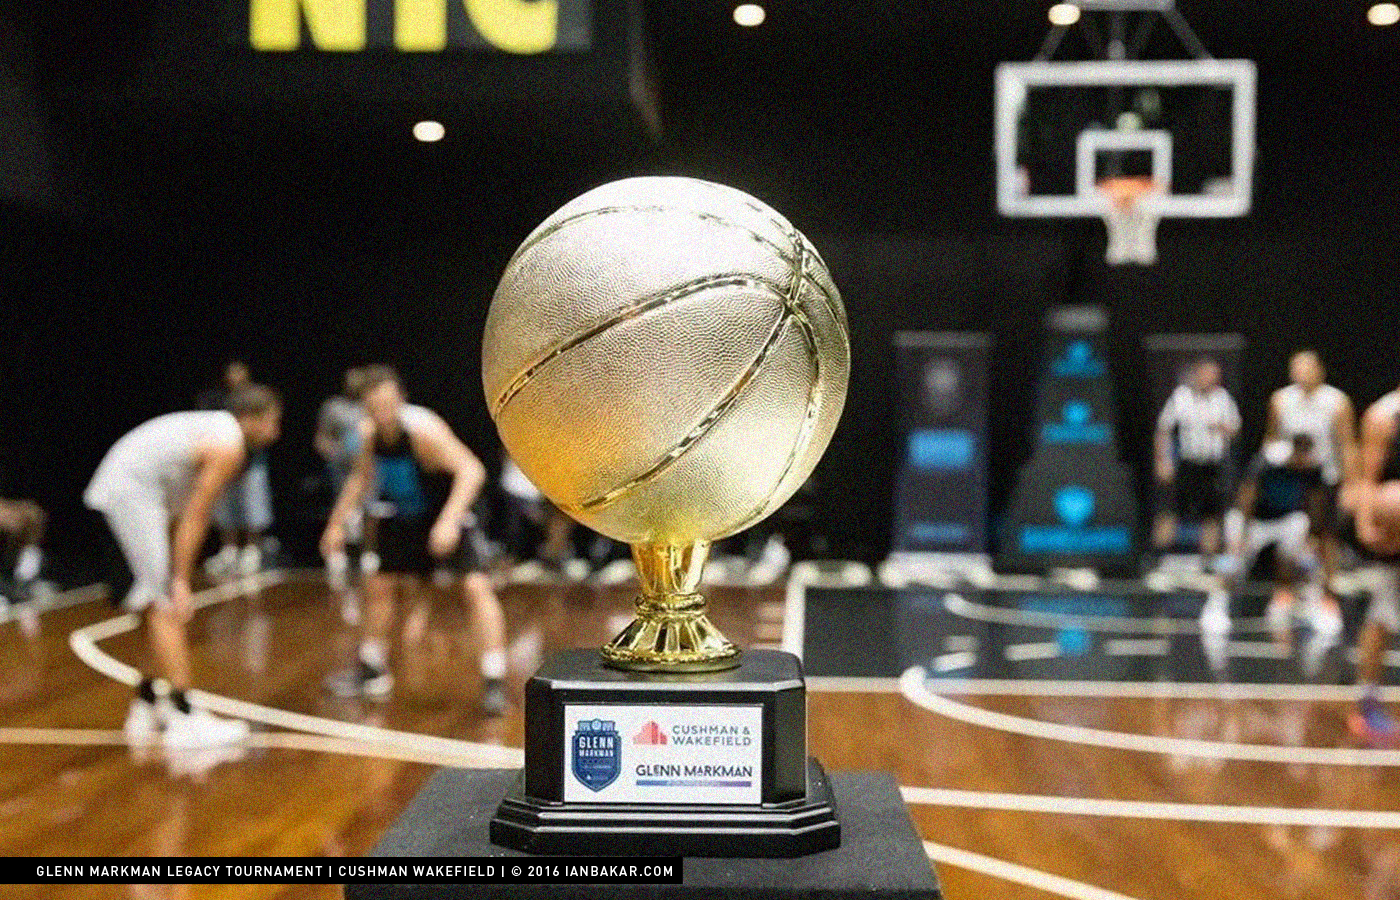 GM_Court-Trophy_Photo_1400.png